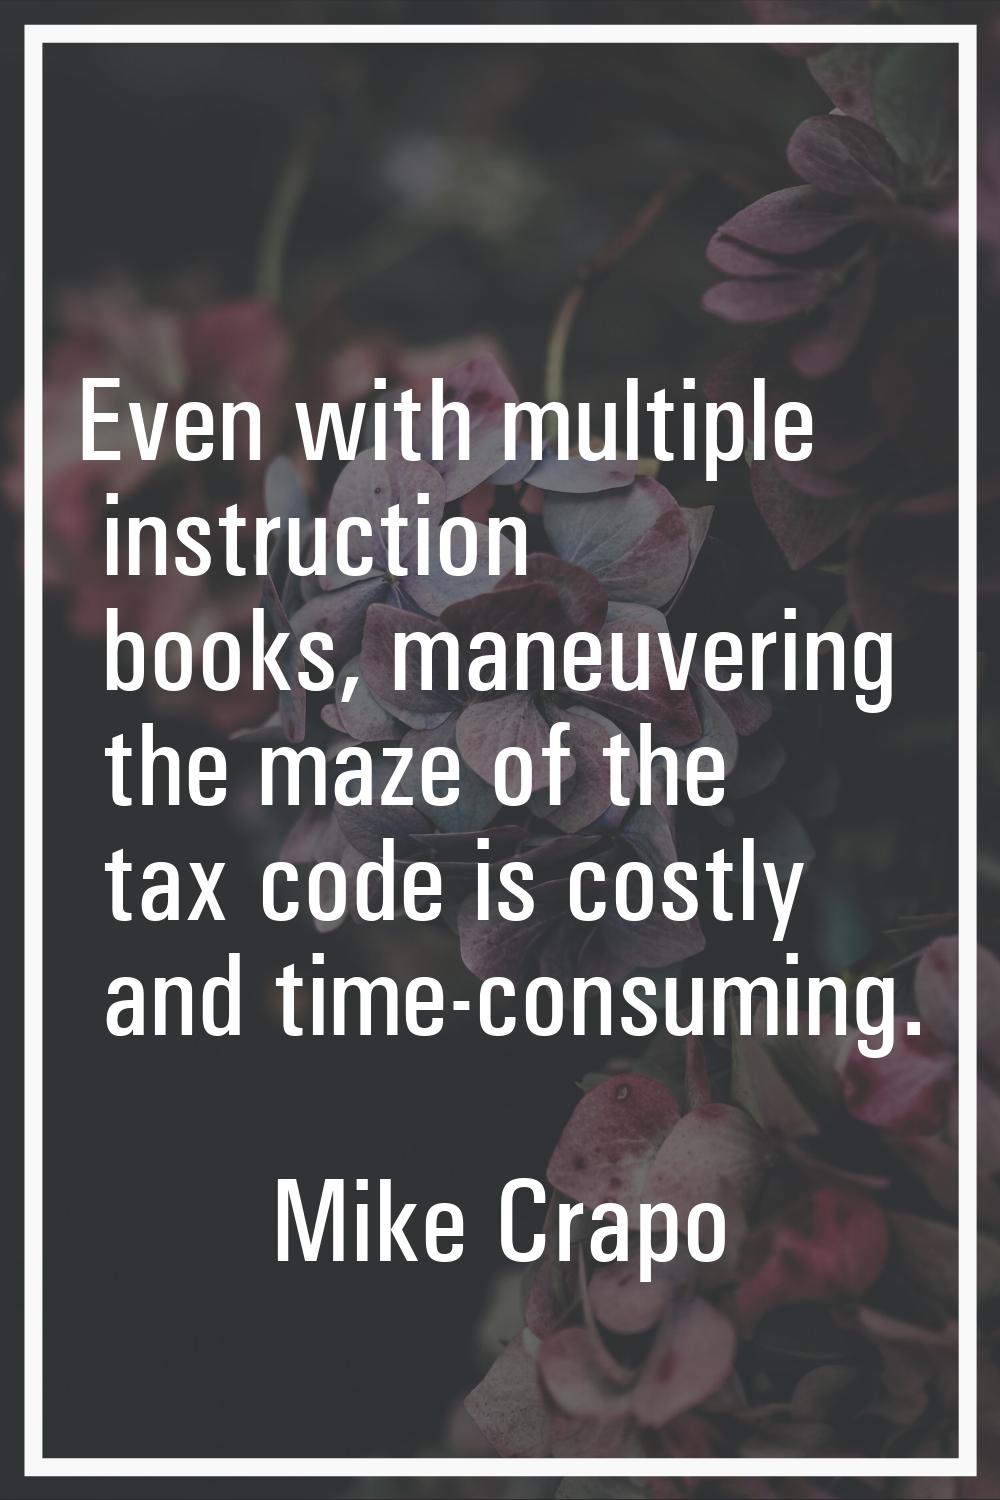 Even with multiple instruction books, maneuvering the maze of the tax code is costly and time-consu